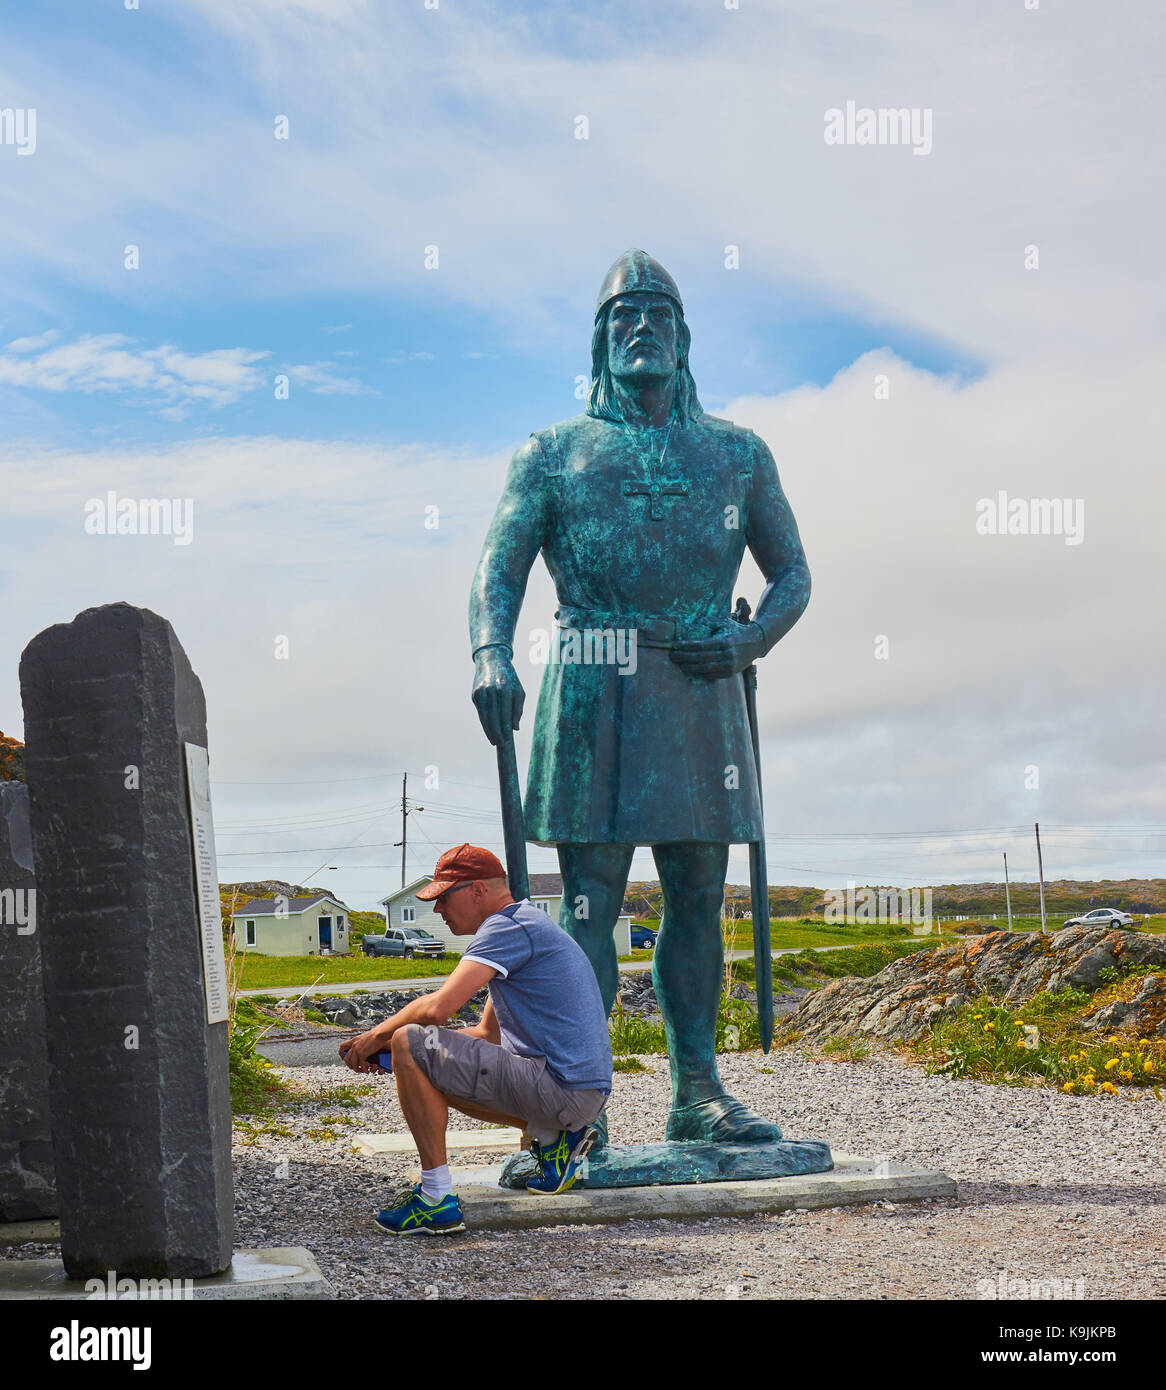 Middle aged male Swedish tourist at Leif Erikson statue, L'Anse Aux Meadows, Newfoundland, Canada. Stock Photo